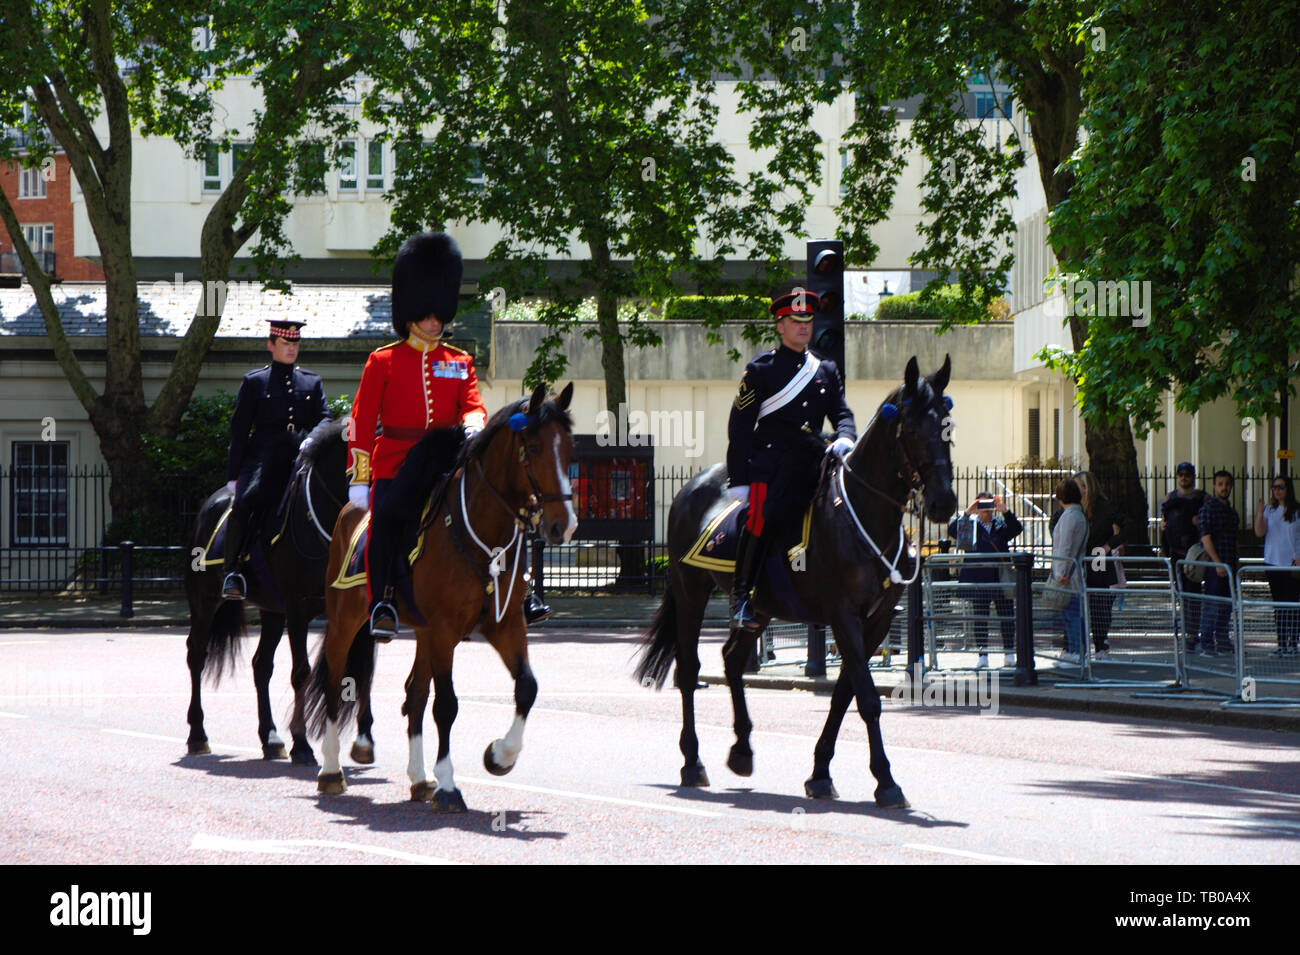 Horsemen and palace guard in front of the Buckingham palace. Queen's birthday celebration rehearsal 2019. London, UK. Stock Photo